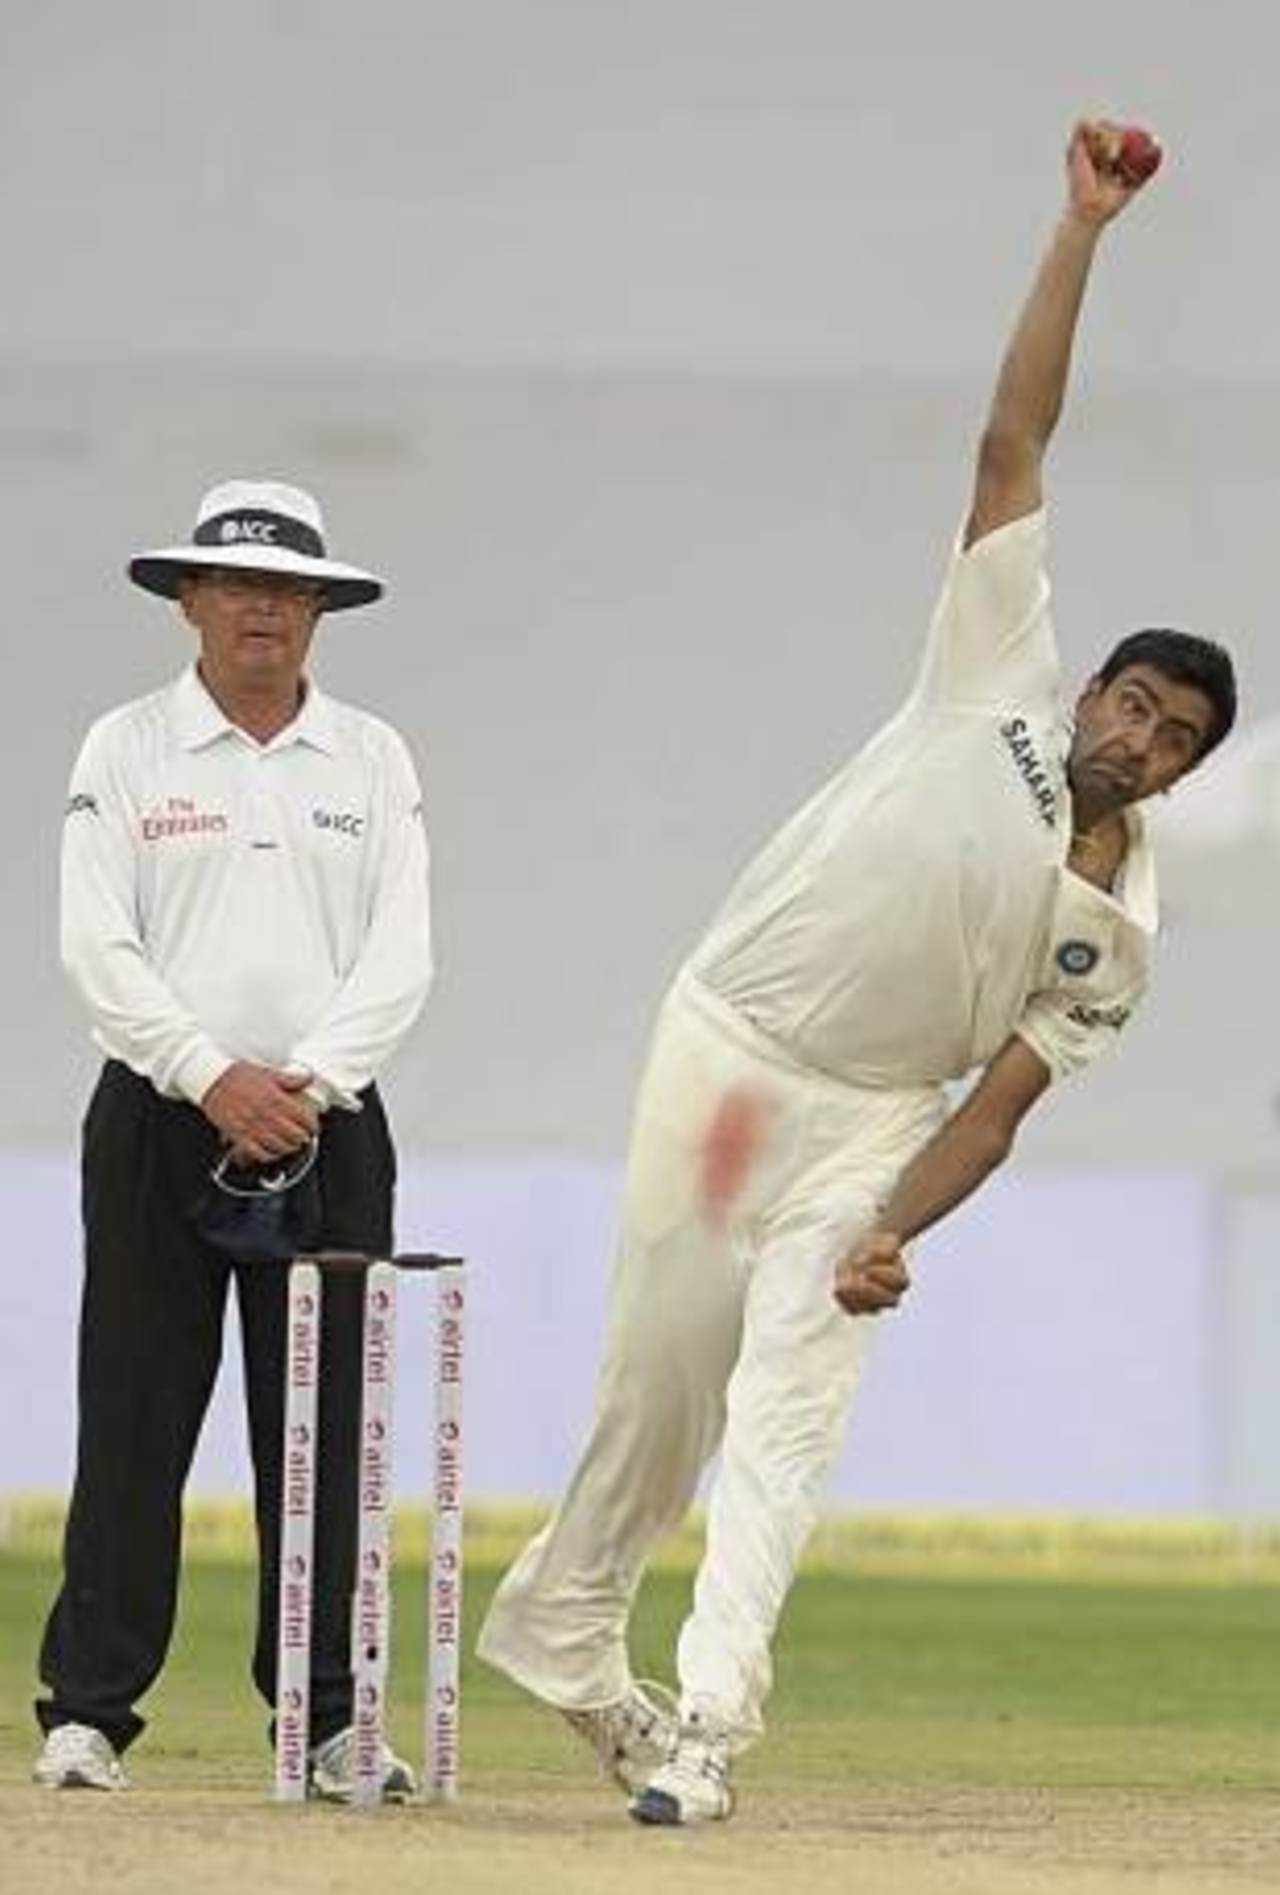 R Ashwin took early wickets to peg New Zealand back, India v New Zealand, 1st Test, Hyderabad, 2nd day, August 24, 2012